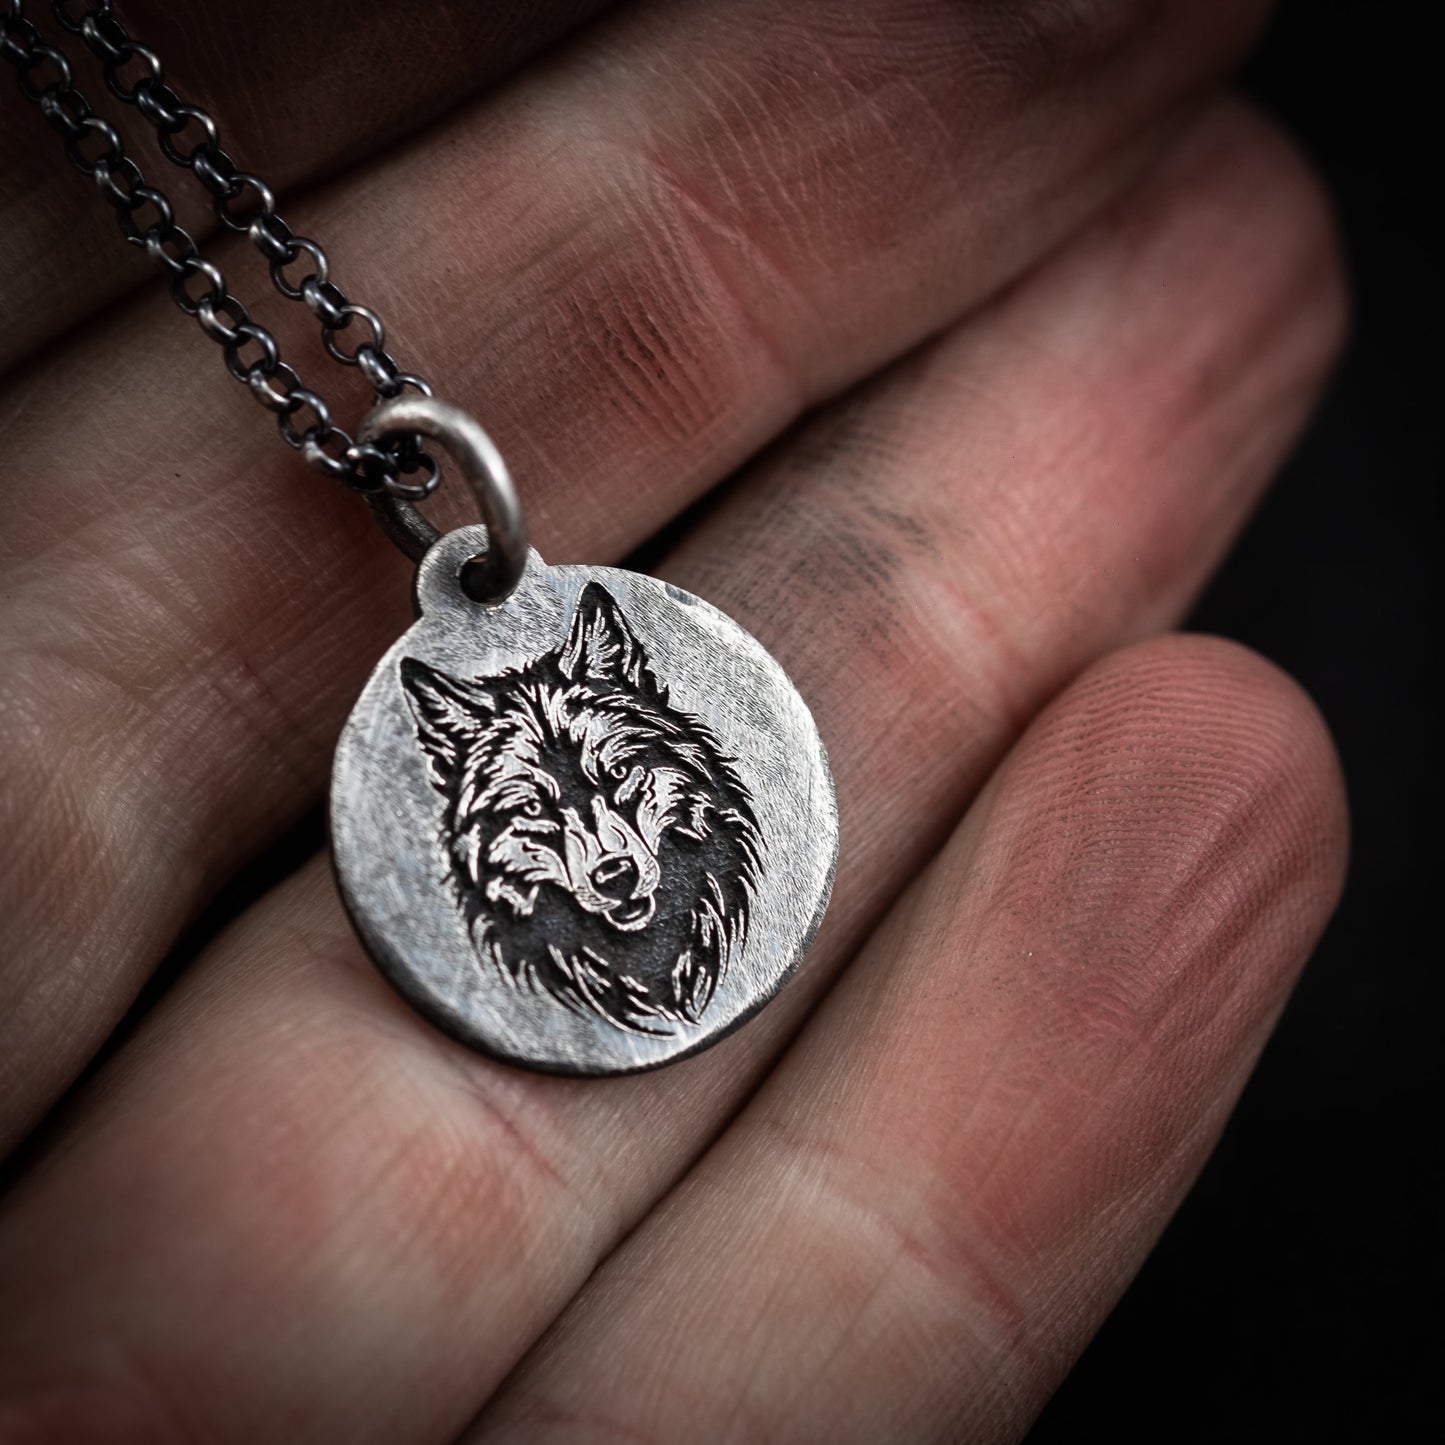 Wolf Head Sterling Silver mens necklace, Viking Animal jewelry, Christmas mens gift, Personalized engraved custom necklace